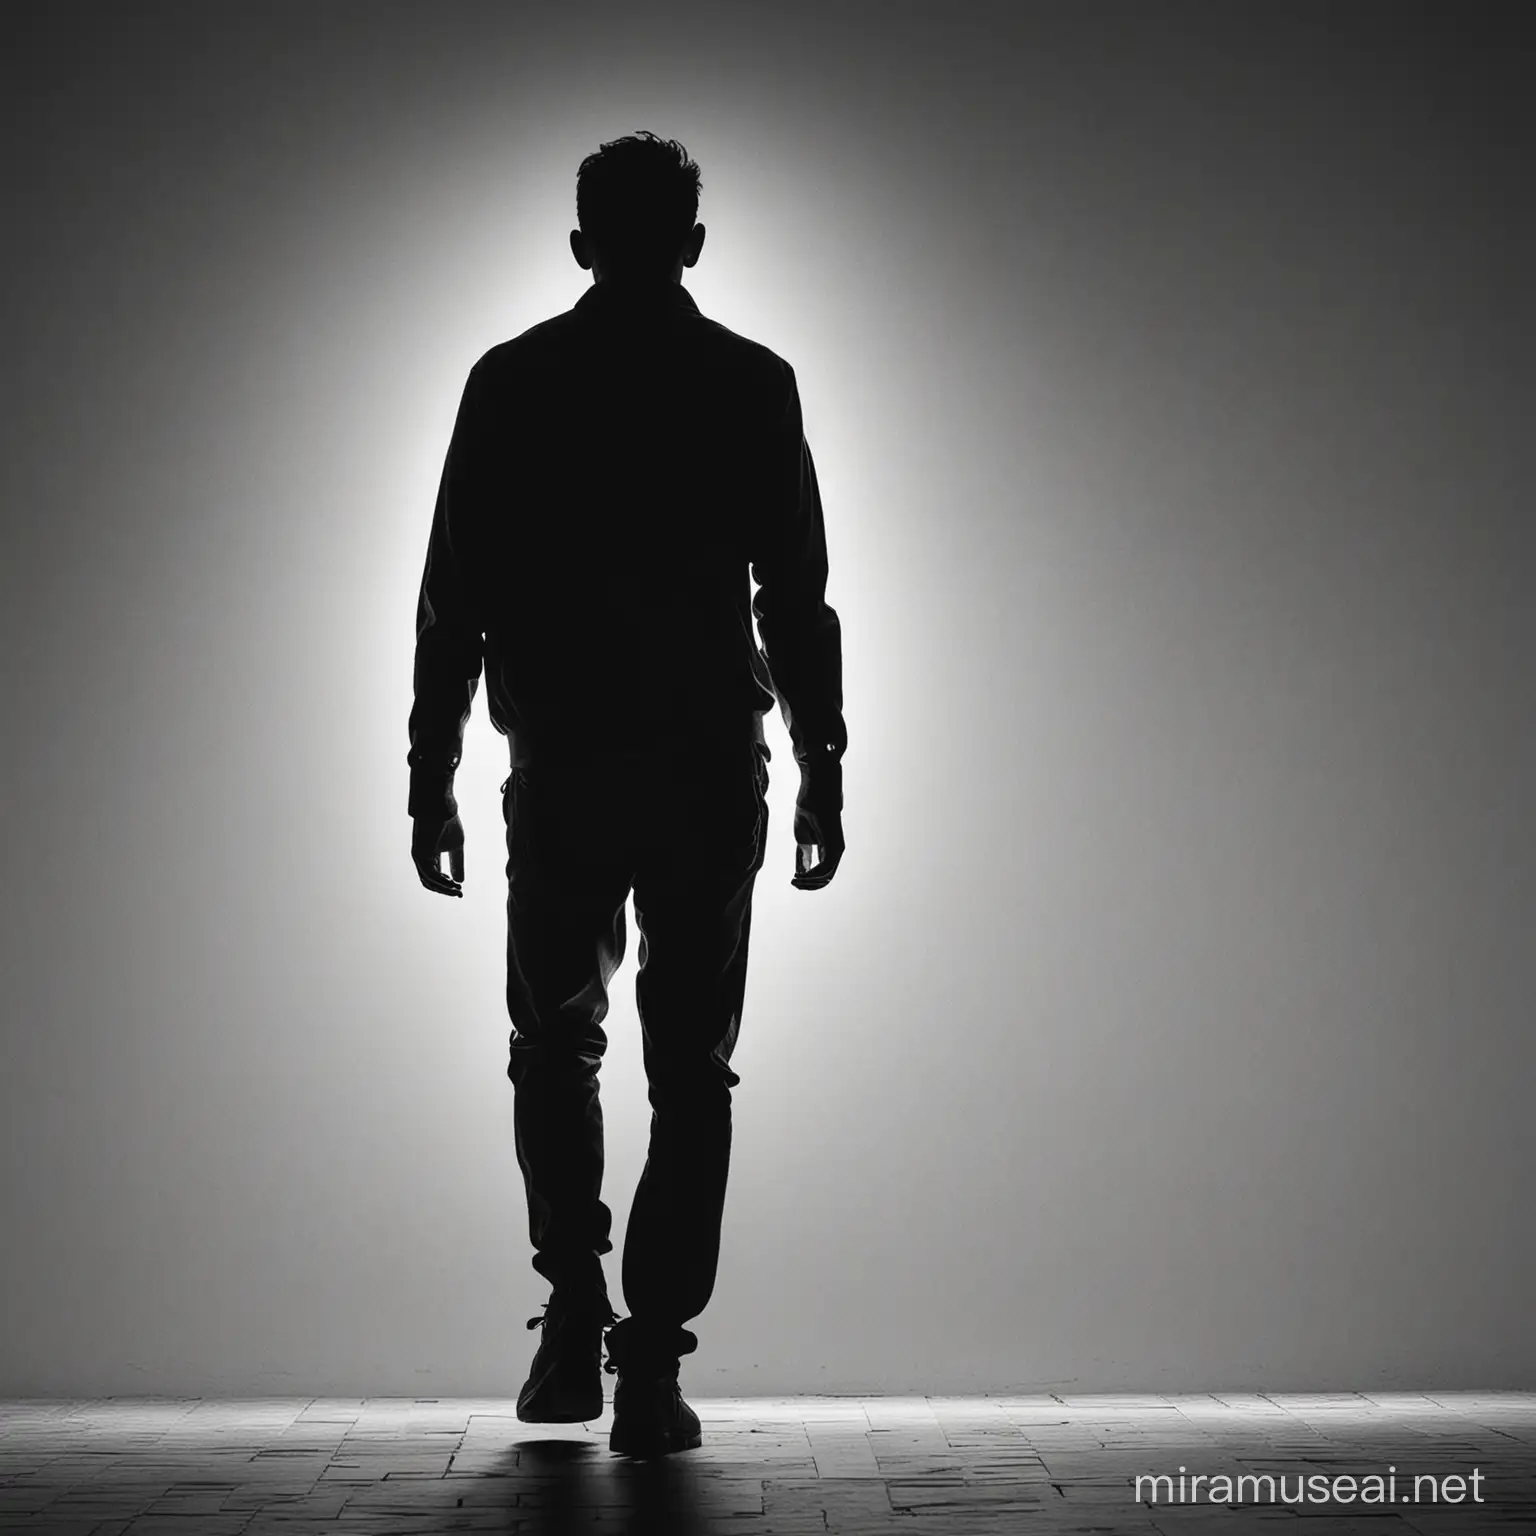 Charismatic Figure Walking with Silhouette